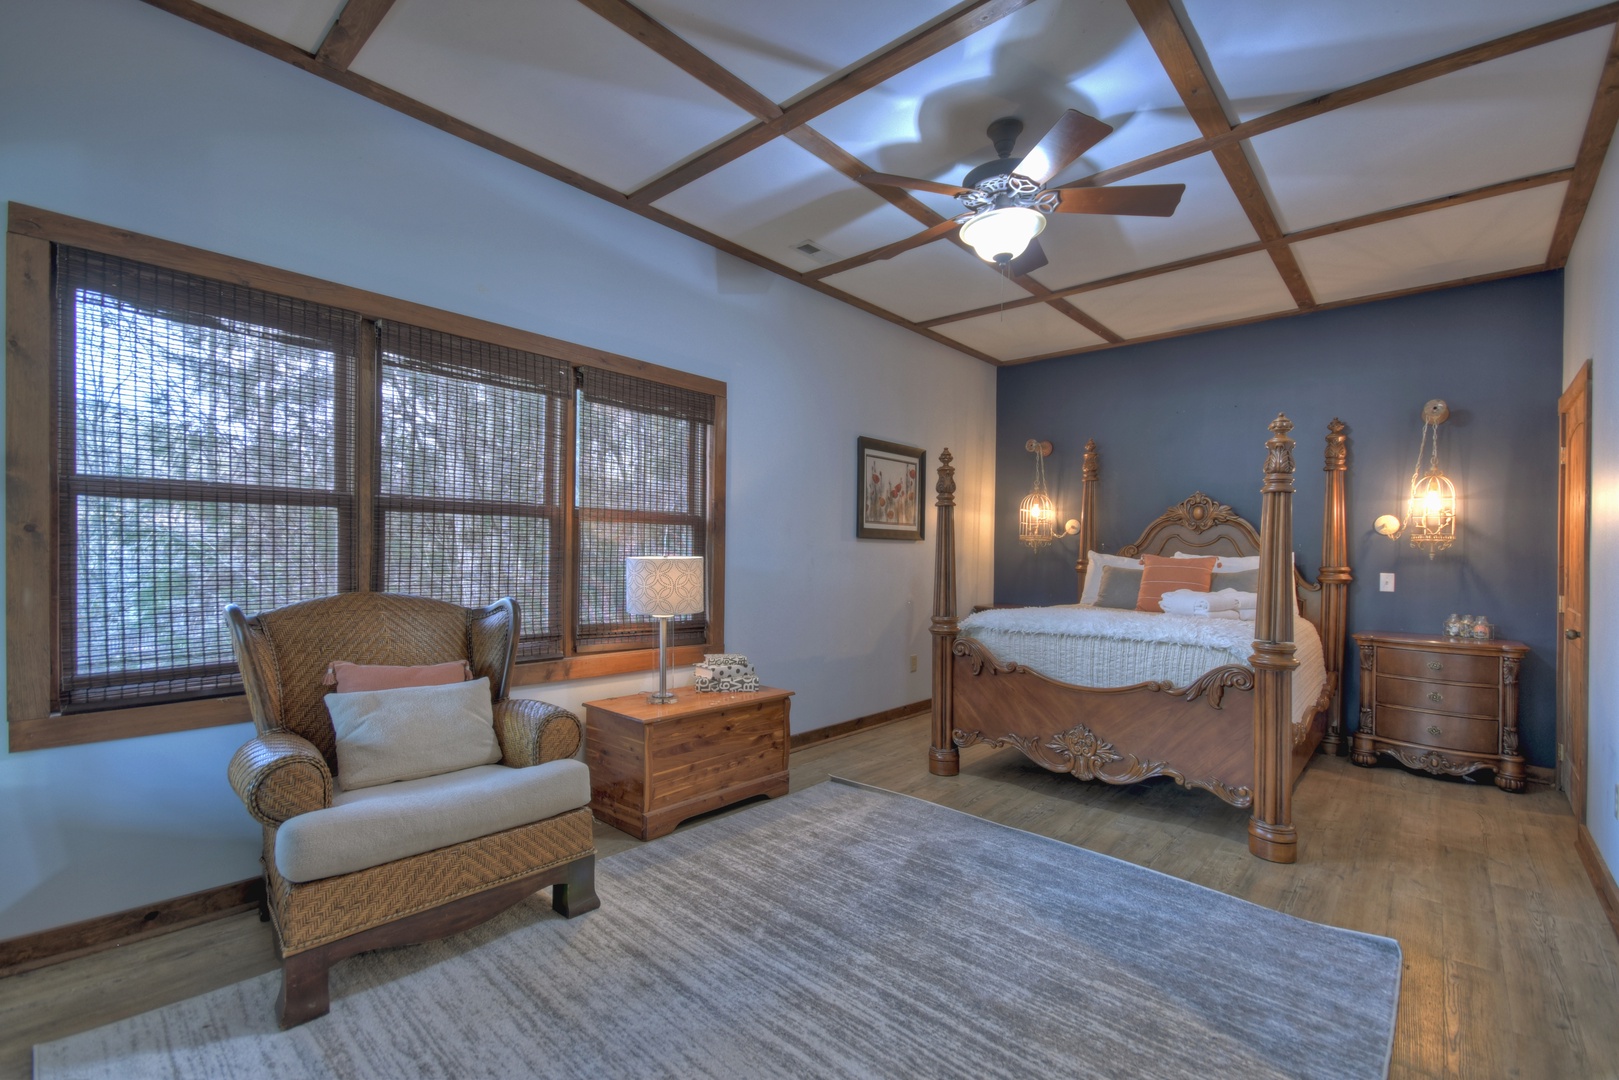 River Lodge- Lower level bedroom suite with seating and matching decor